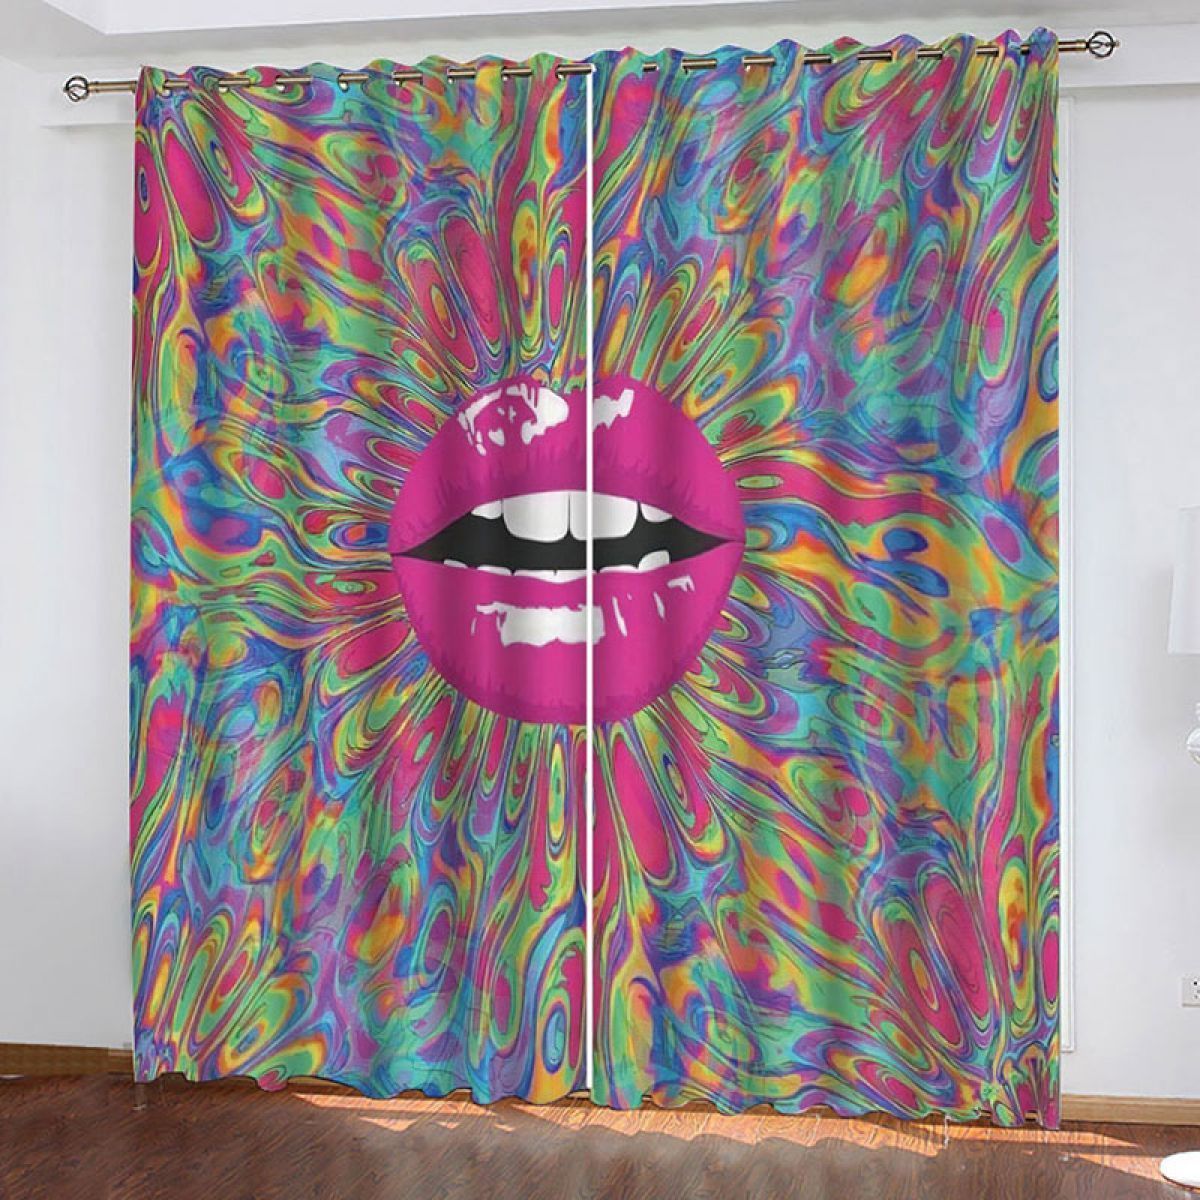 lipstick mouth watercolor printed window curtain home decor 5192